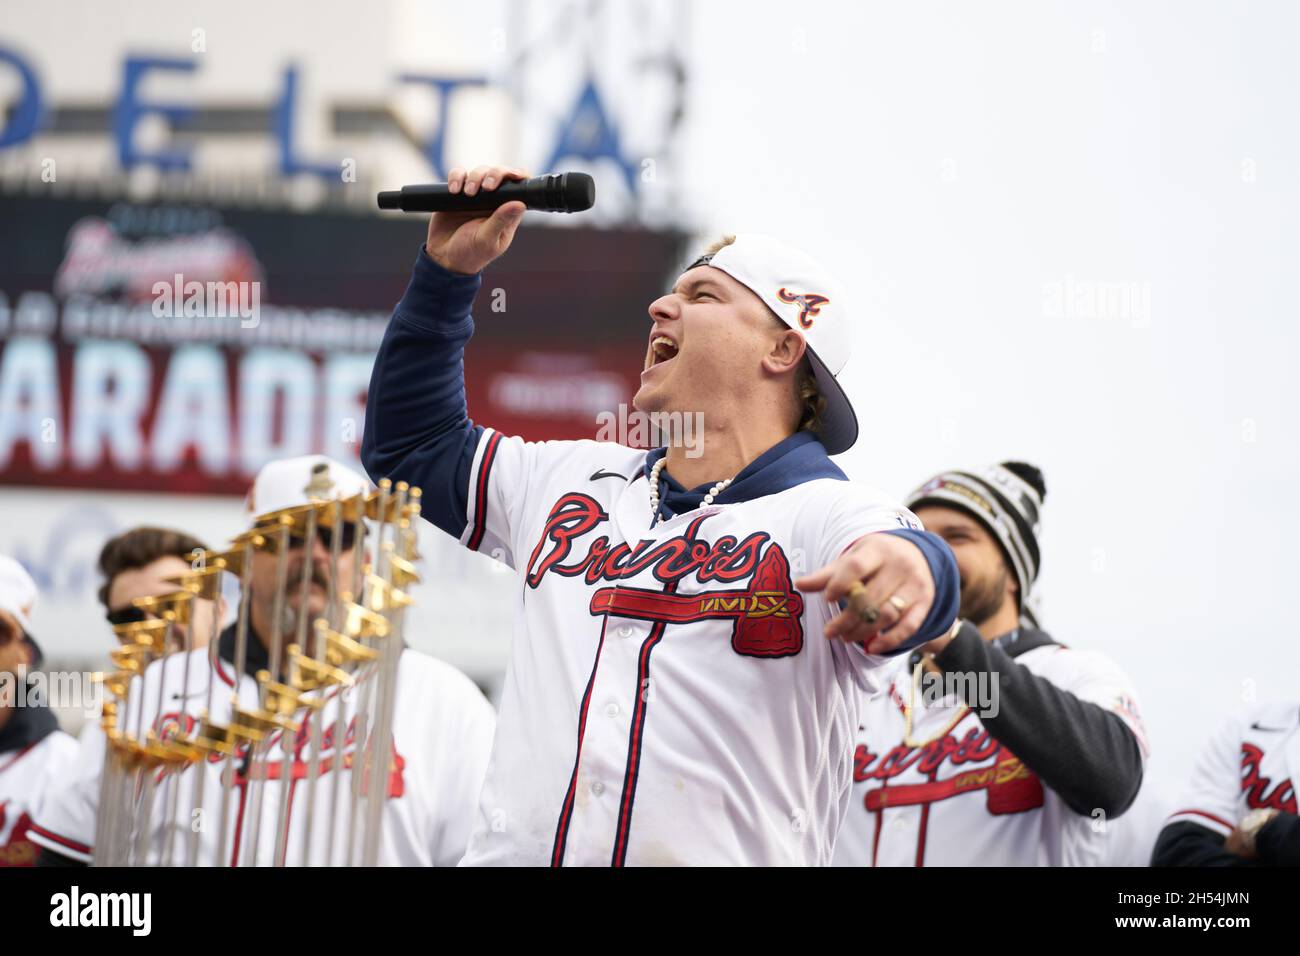 Braves pitcher Tyler Matzek involved in odd incident at World Series parade